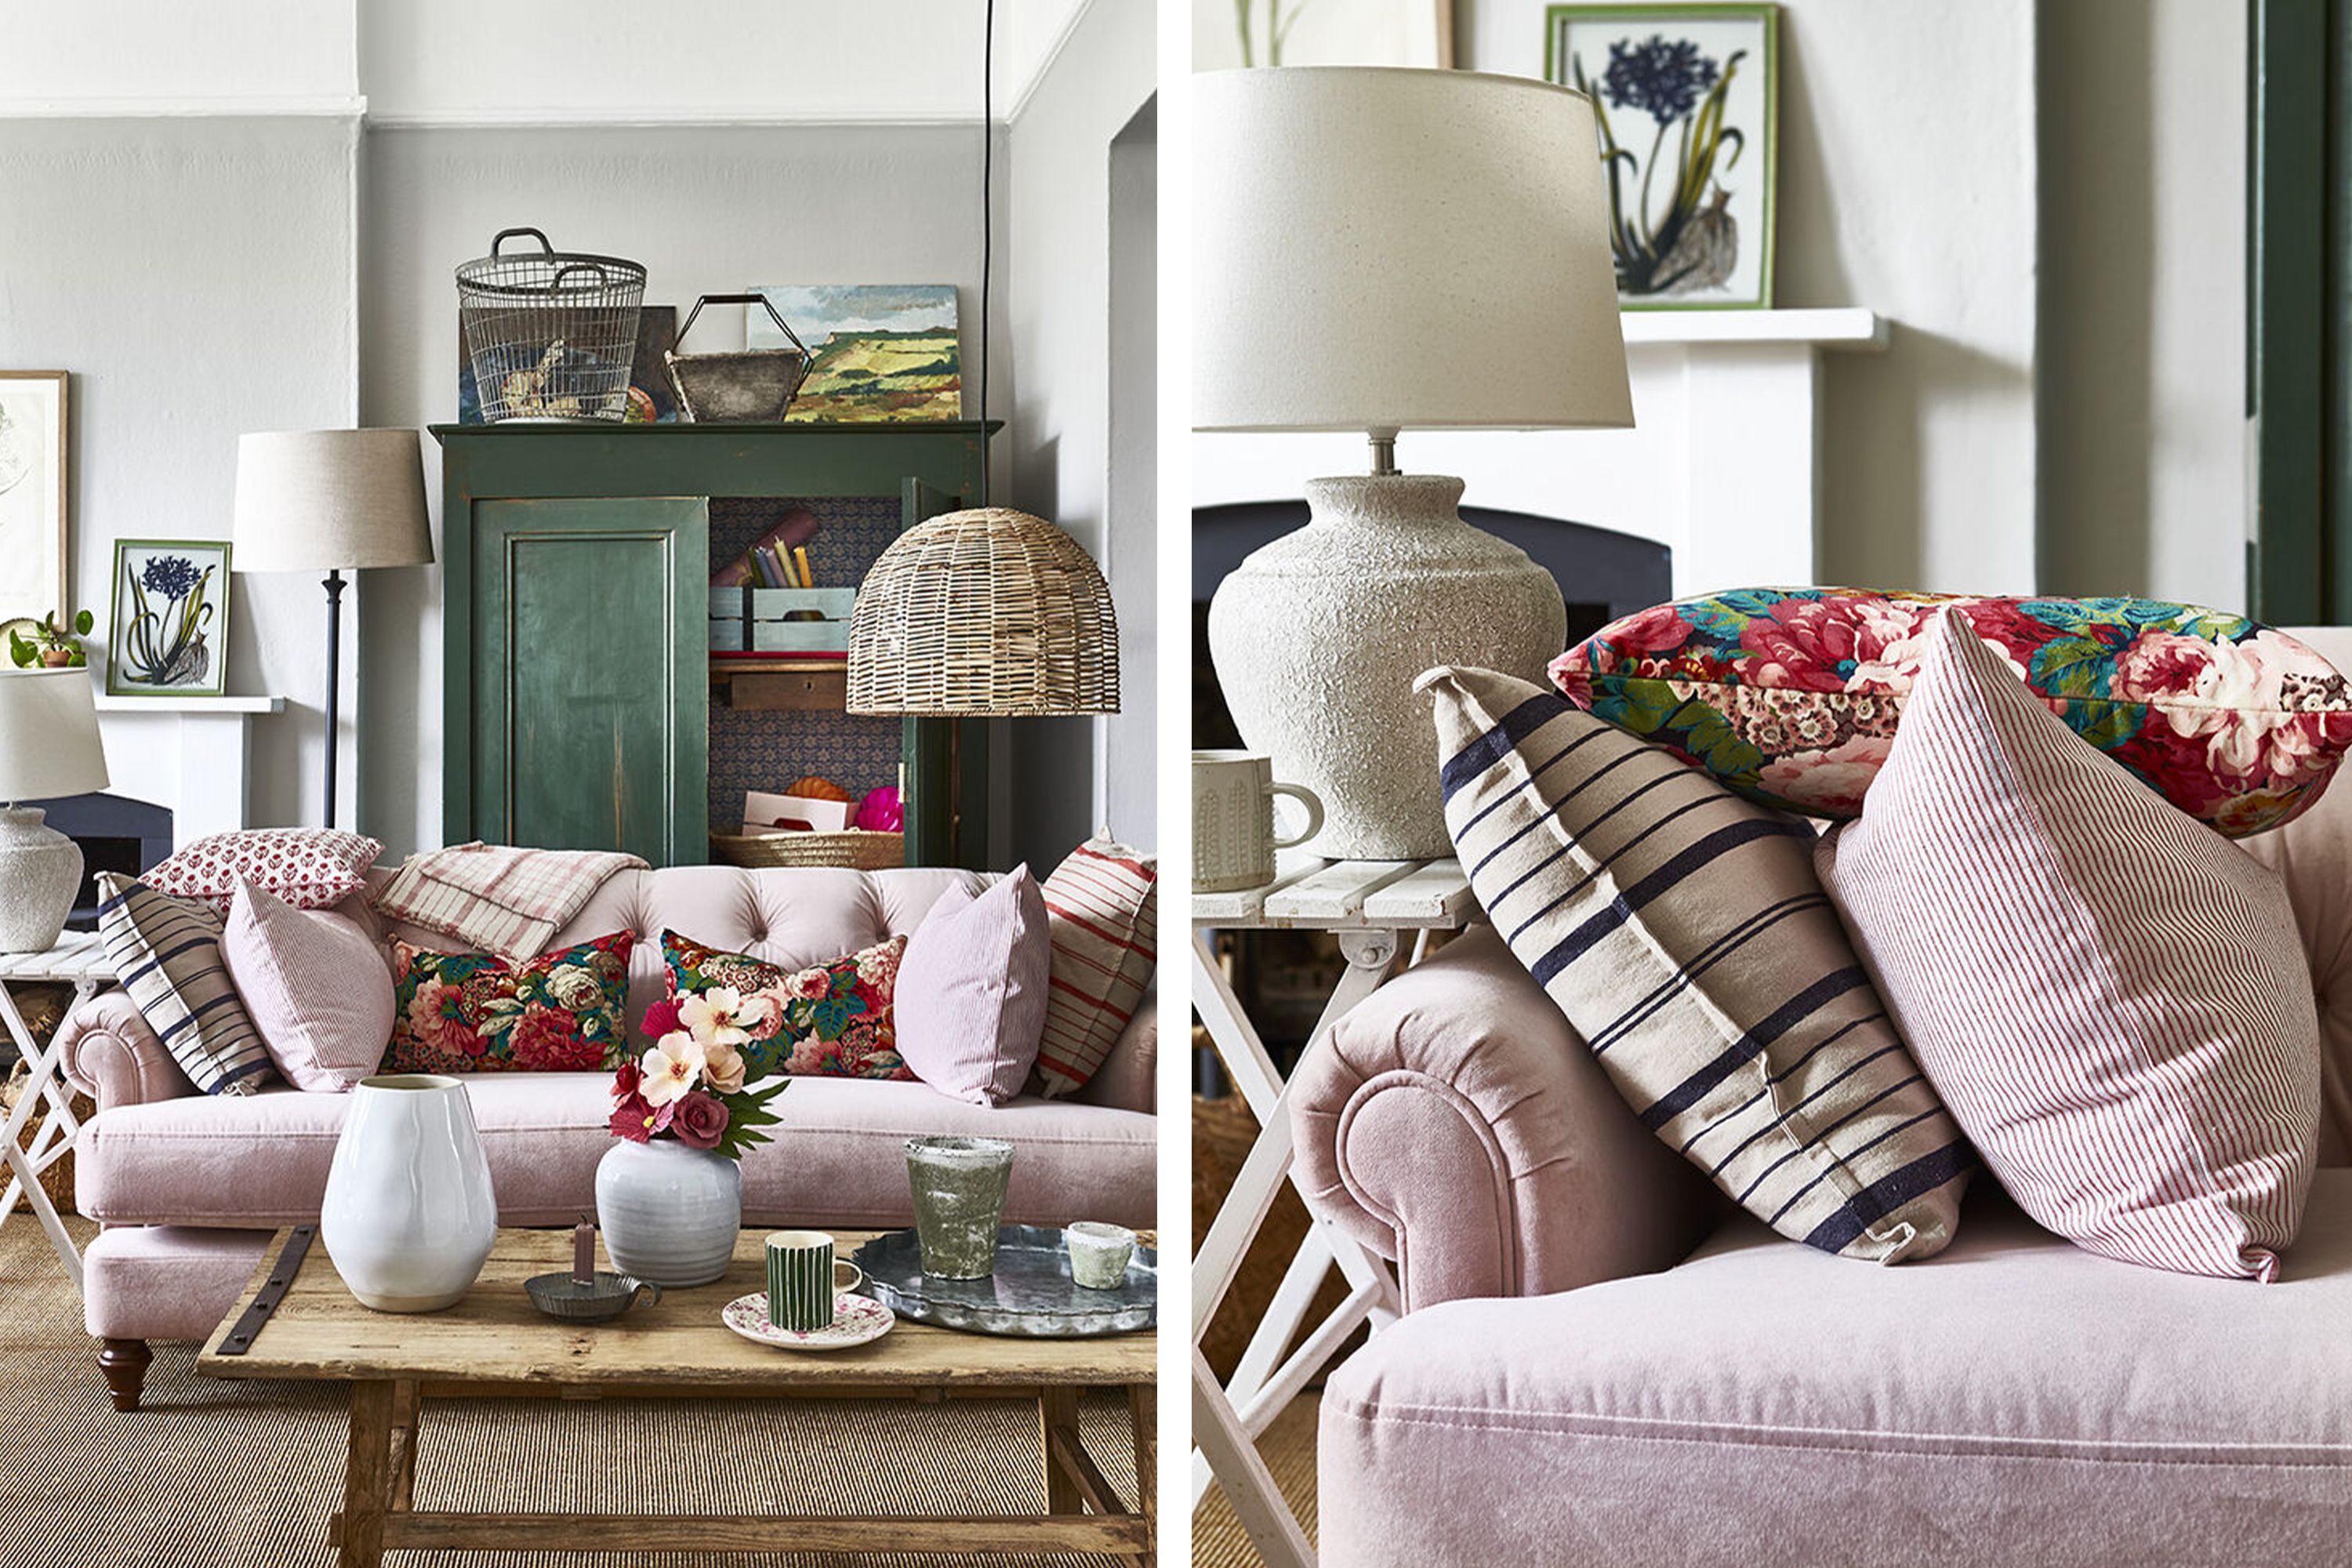 6 Designer Tips for Decorating with Plaid